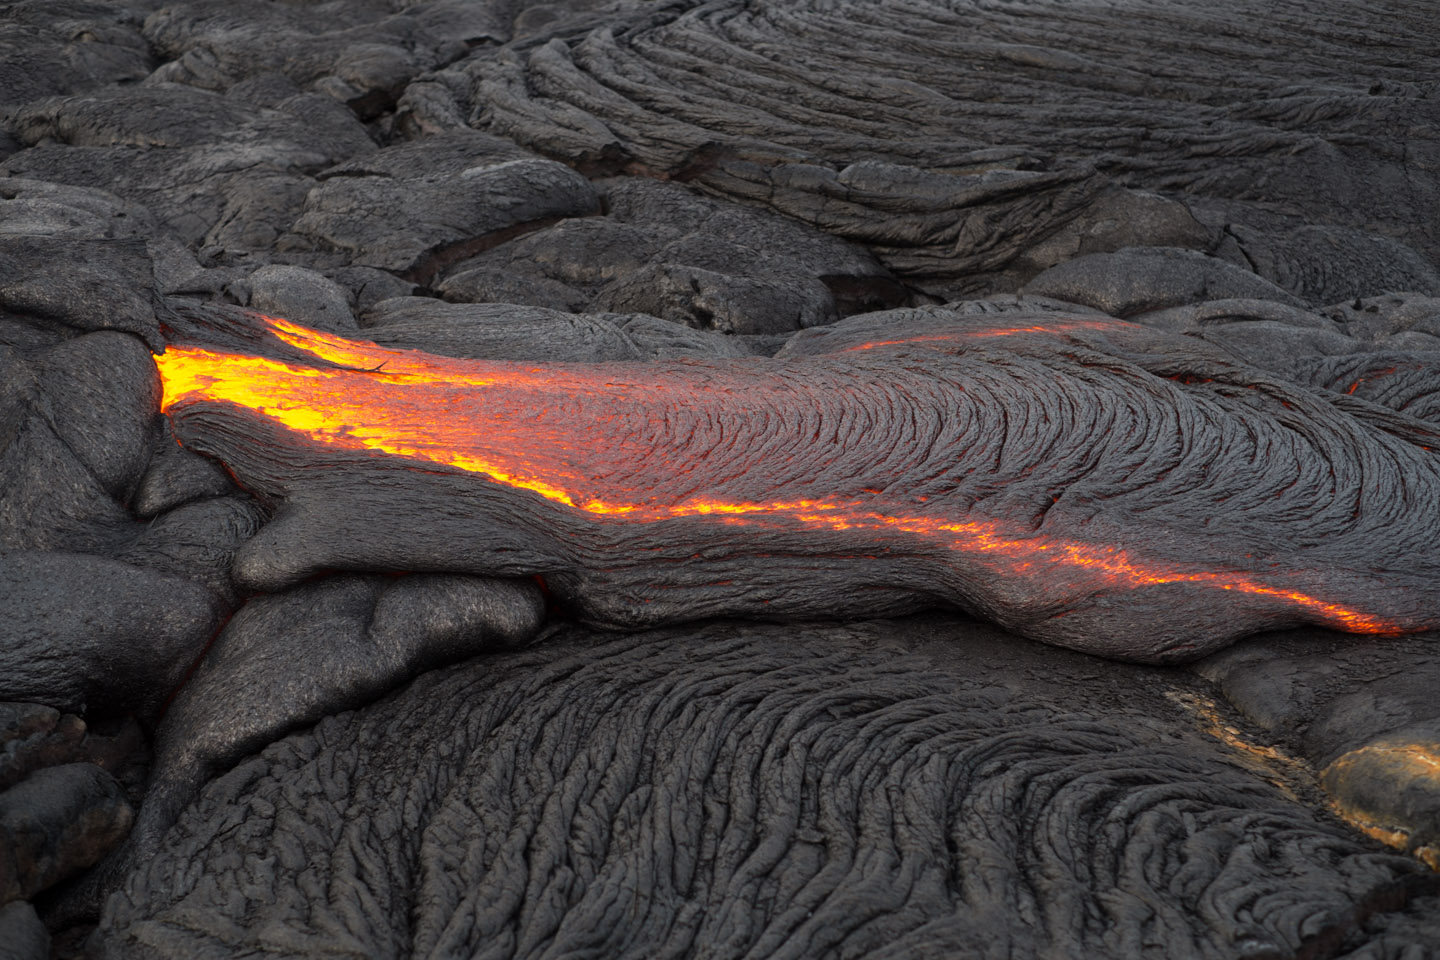 Where lava ripples come from